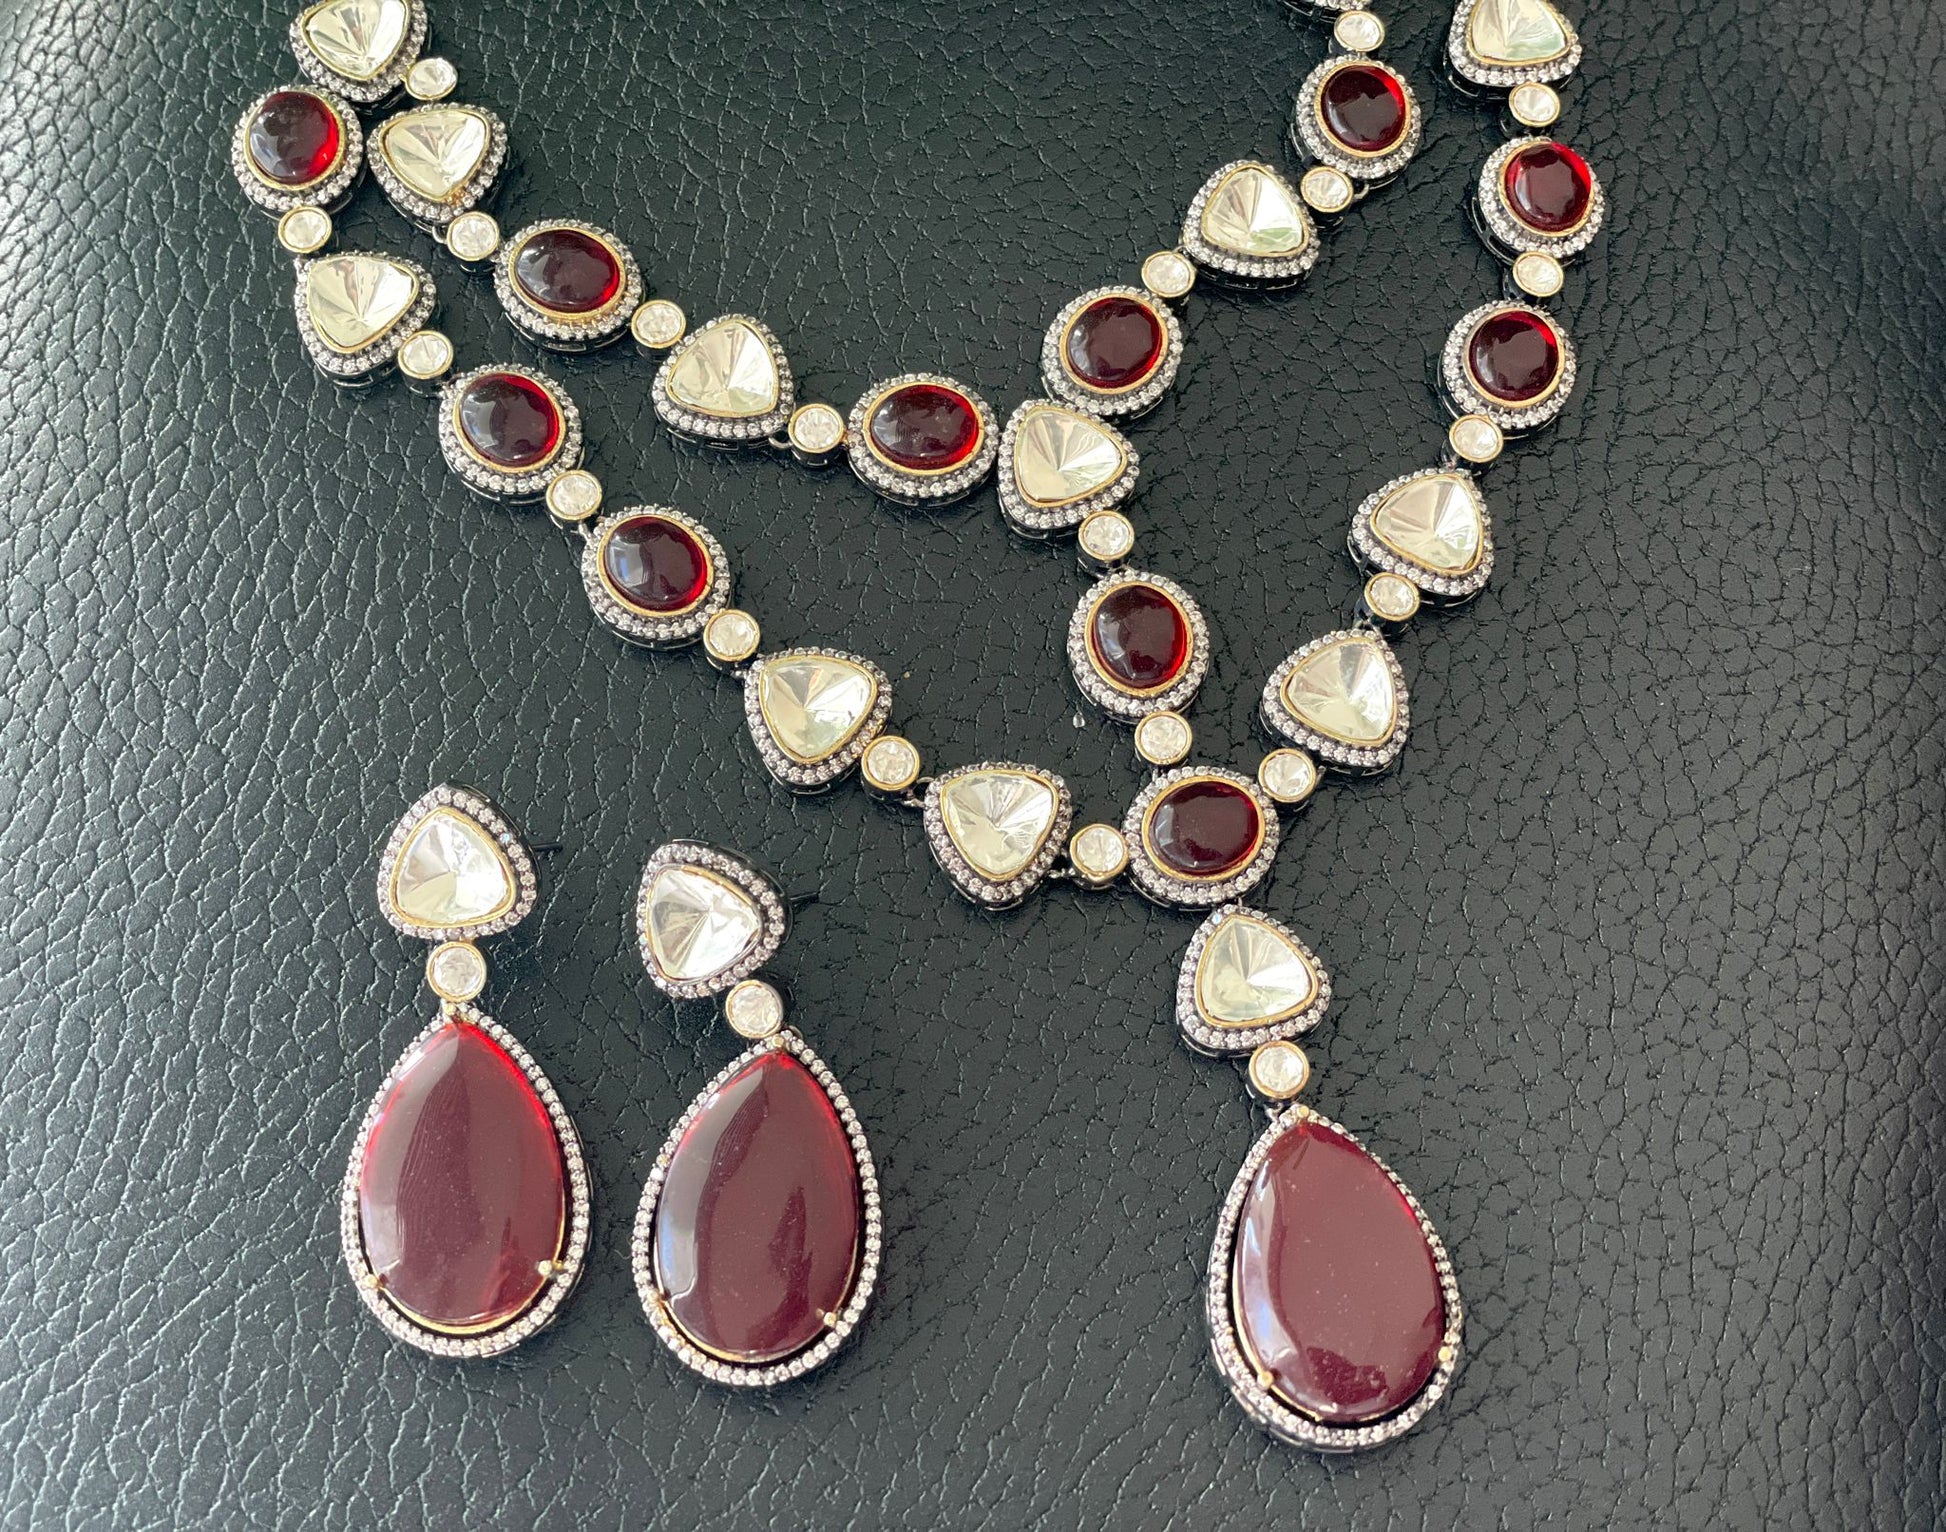 a beautiful necklace set with earrings